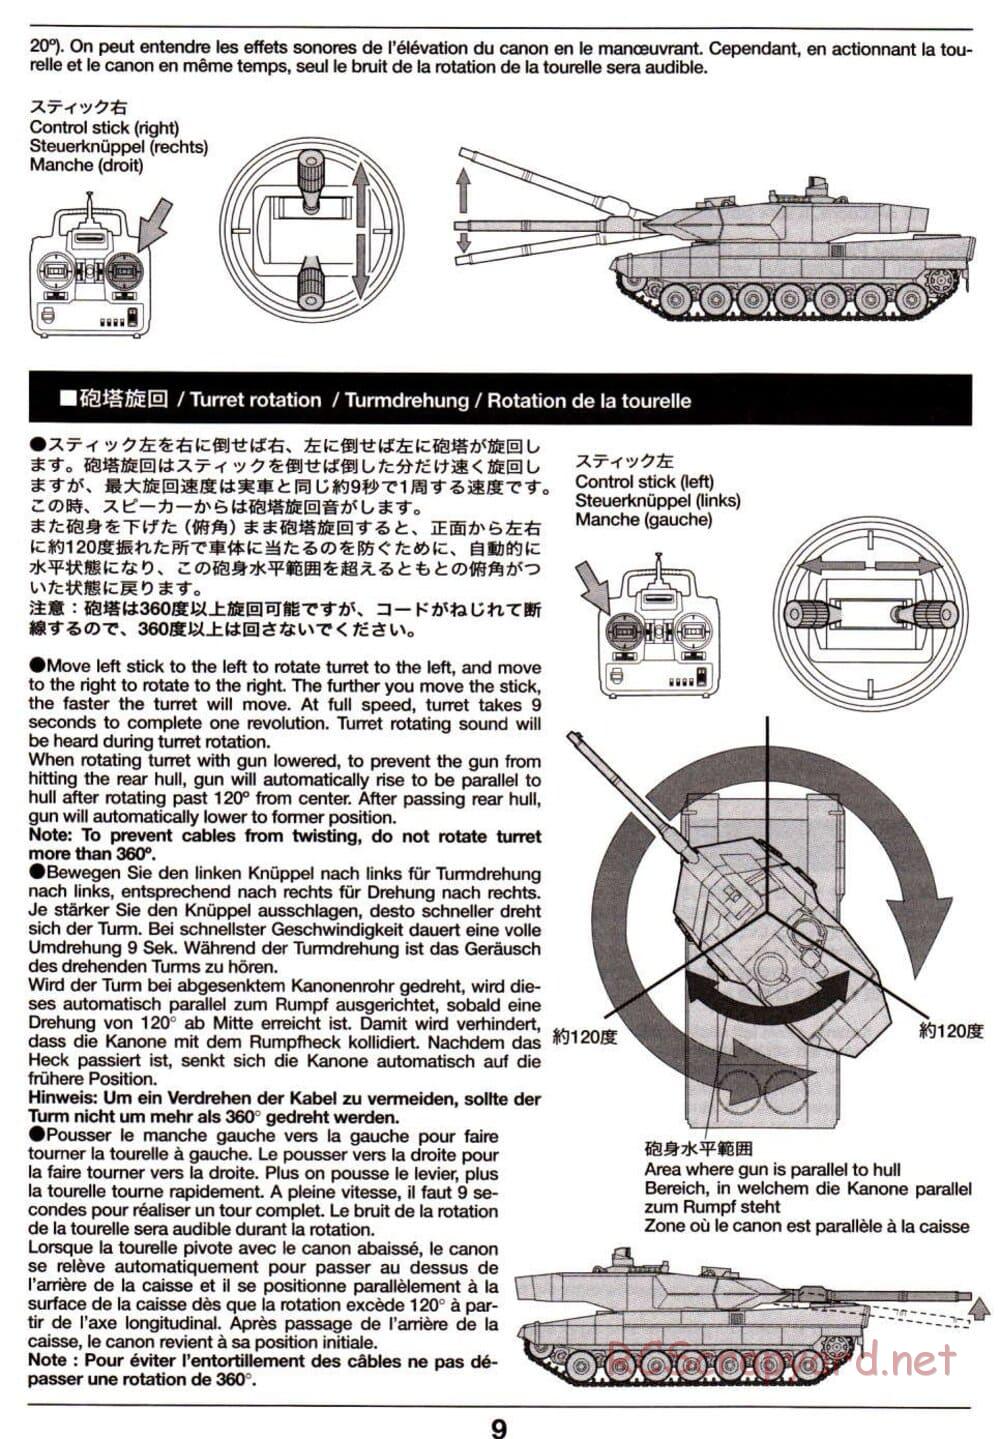 Tamiya - Leopard 2 A6 - 1/16 Scale Chassis - Operation Manual - Page 9